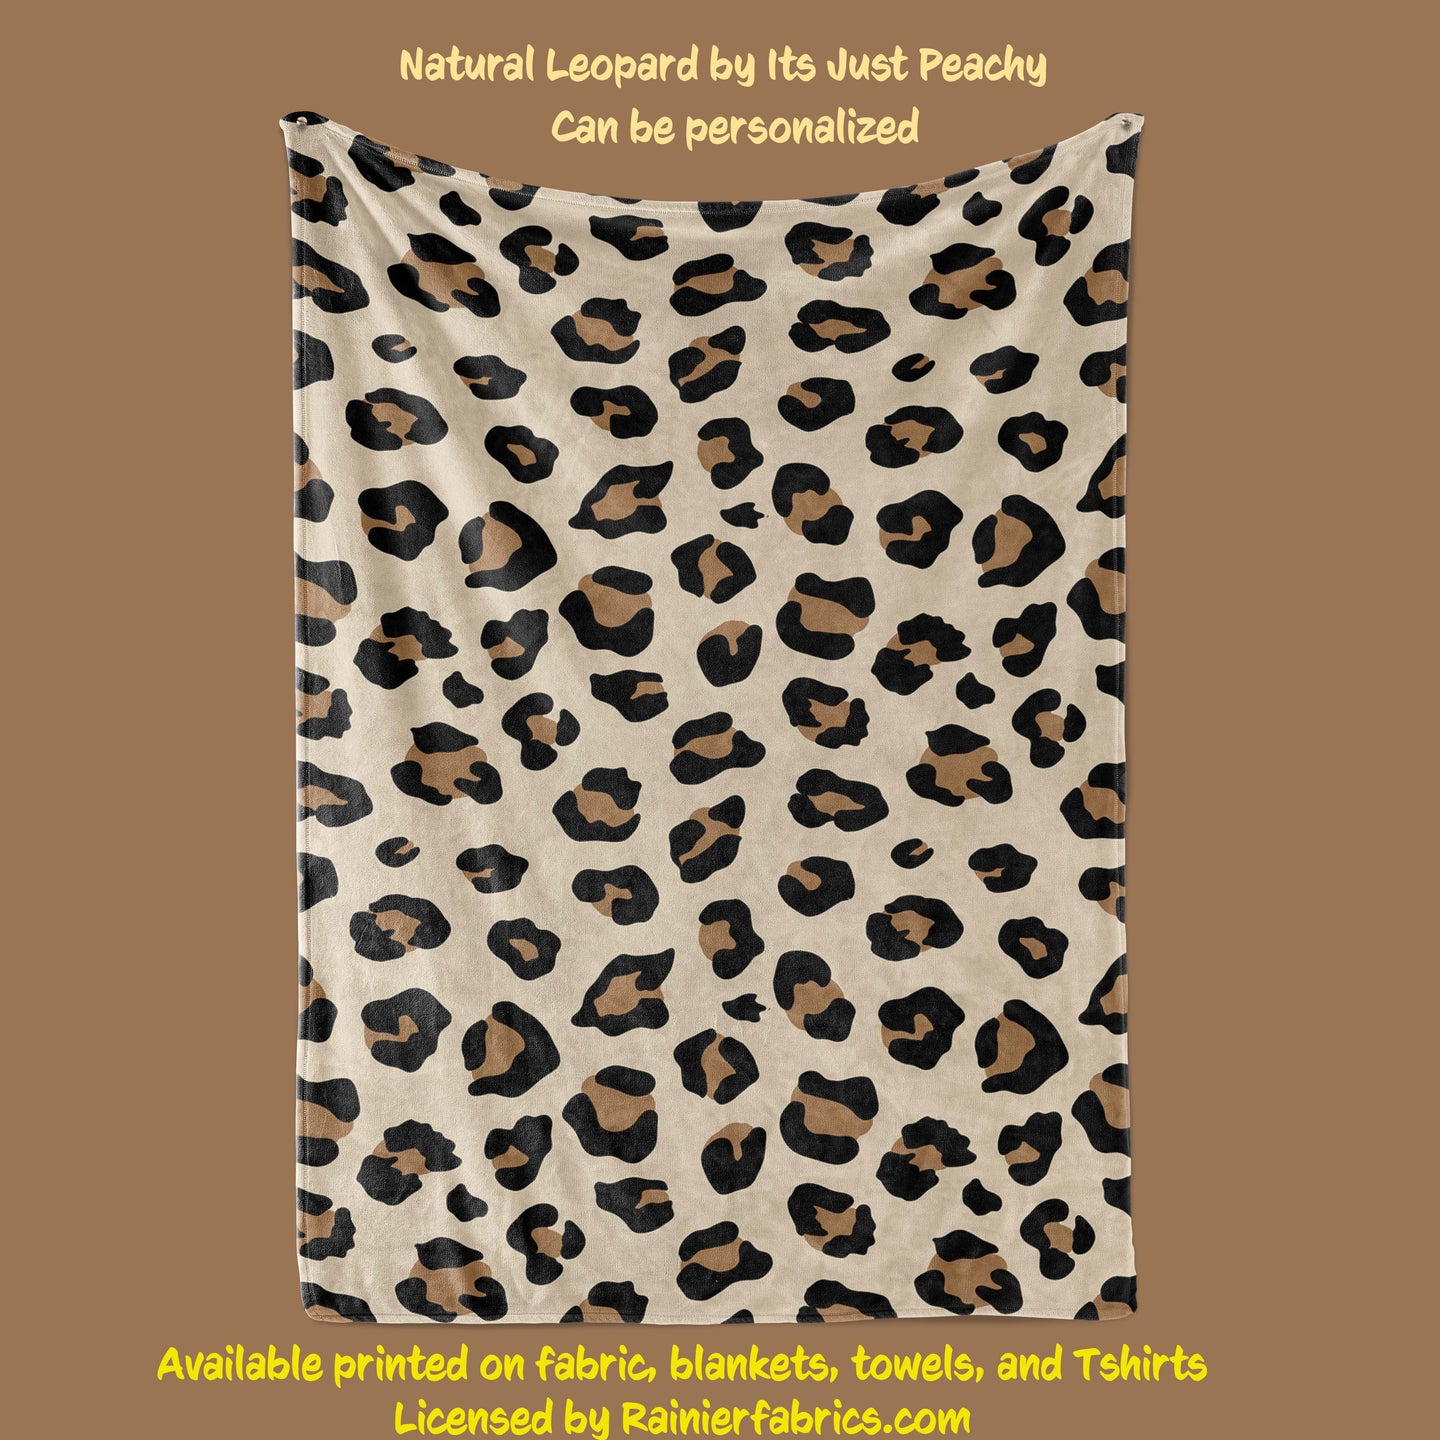 Leopard by It's Just Peachy - Blanket